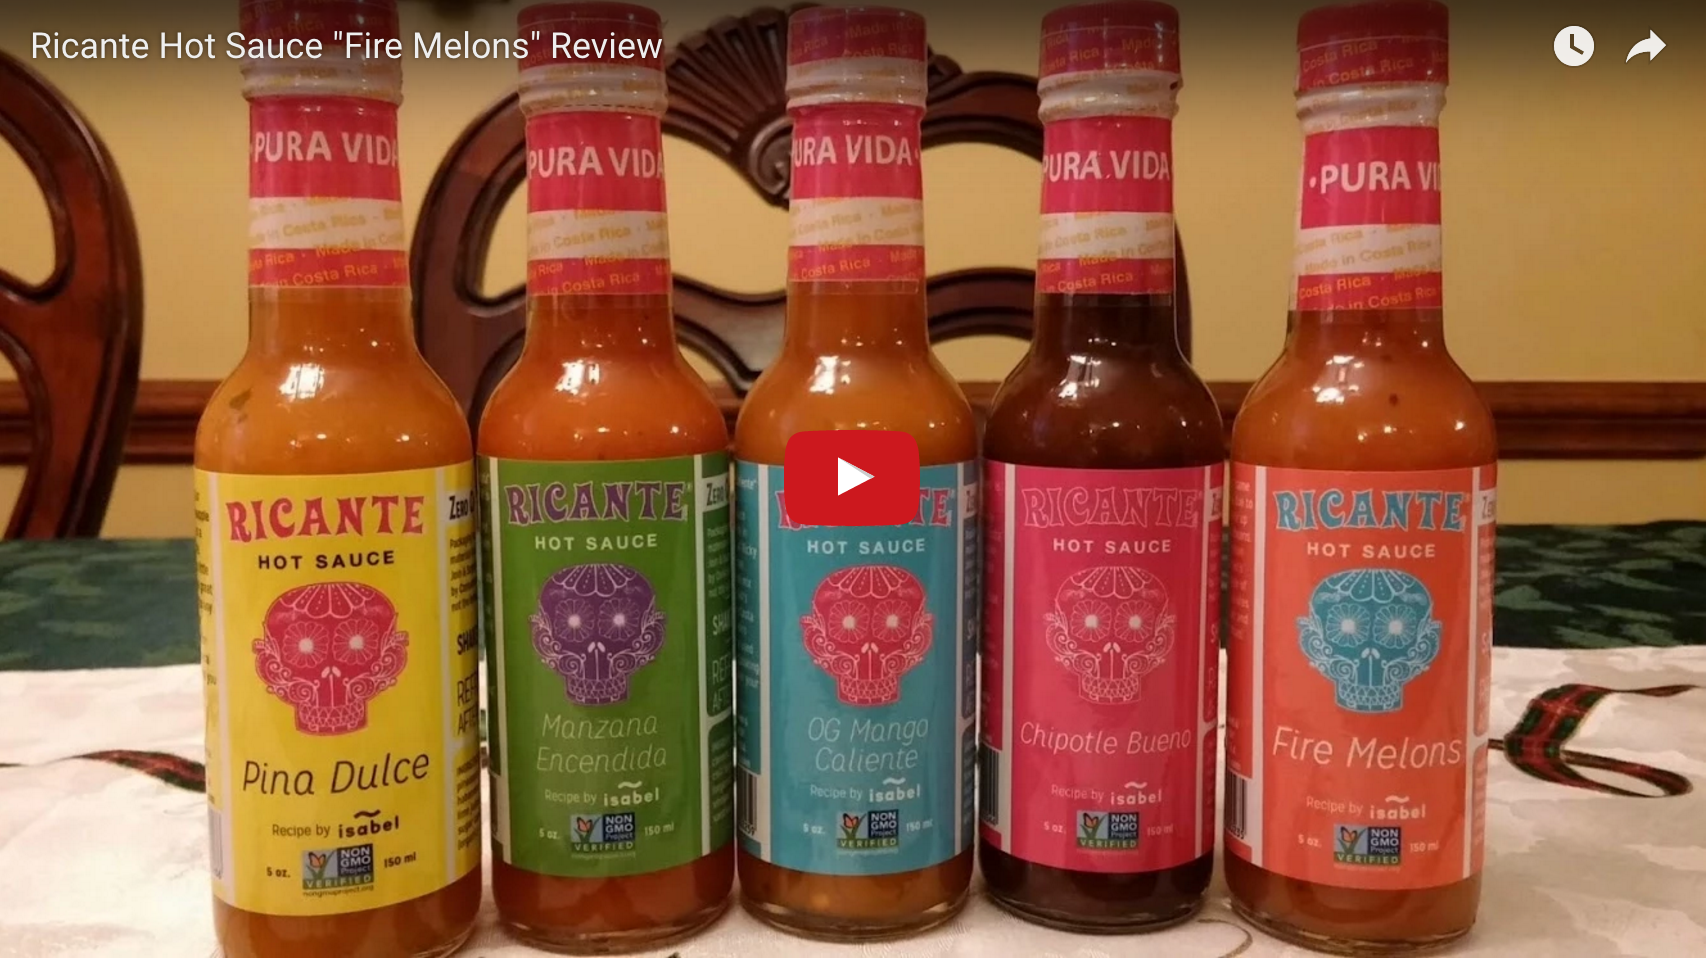 Bill Moore's Ricante Hot Sauce "Fire Melons" Review